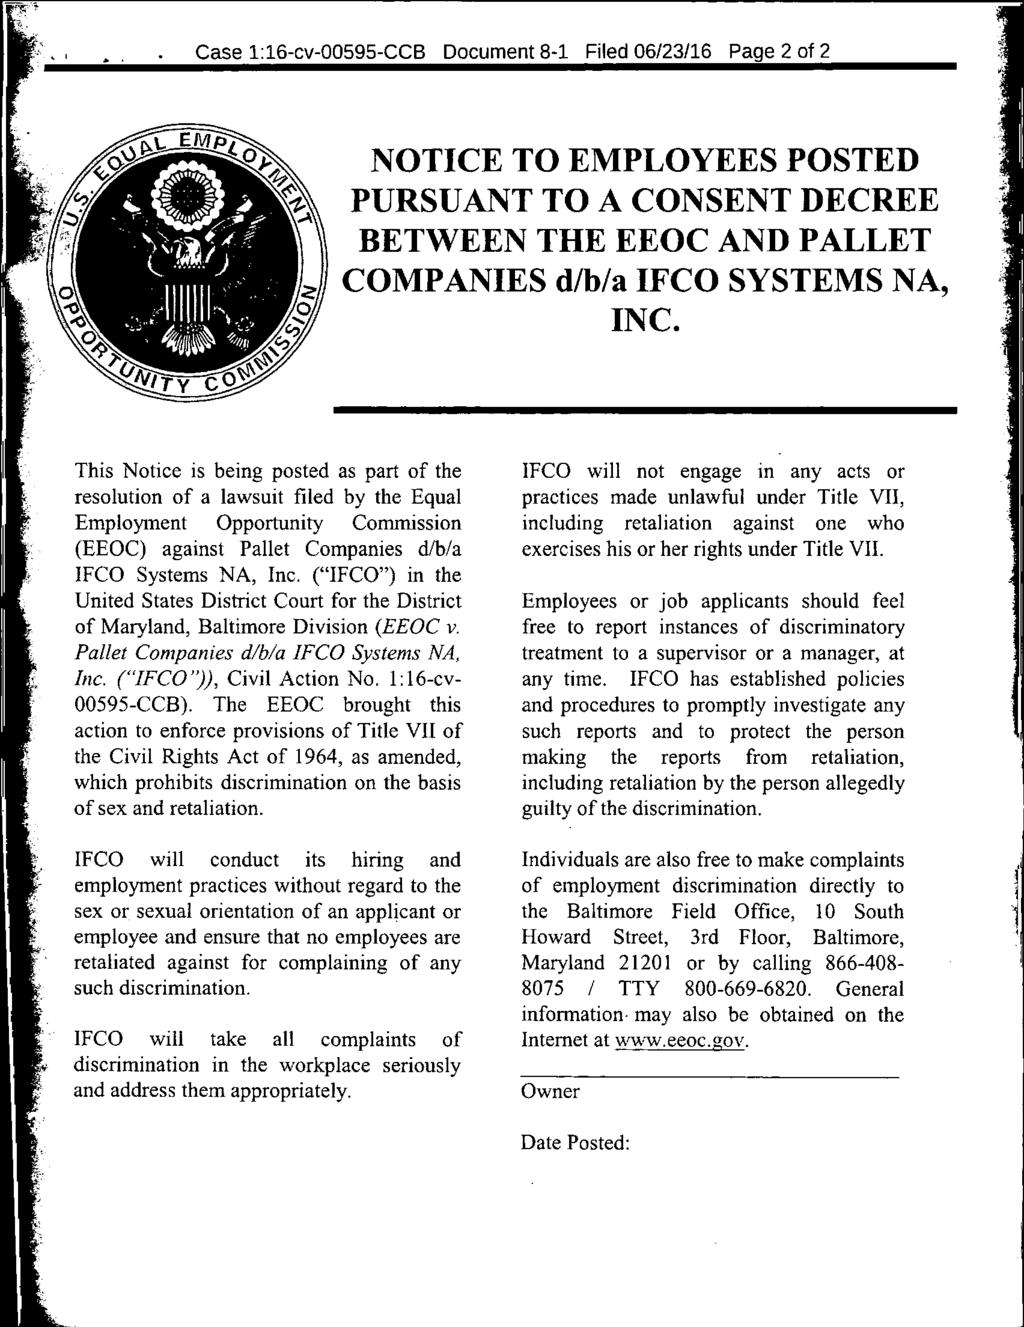 Case 1:16-cv-00595-CCB Document 98-1Filed Filed 06/28/16 06/23/16Page Page 132of of142 NOTICE TO EMPLOYEES POSTED PURSUANT TO A CONSENT DECREE BETWEEN THE EEOC AND PALLET COMPANIES d/b/a IFCO SYSTEMS